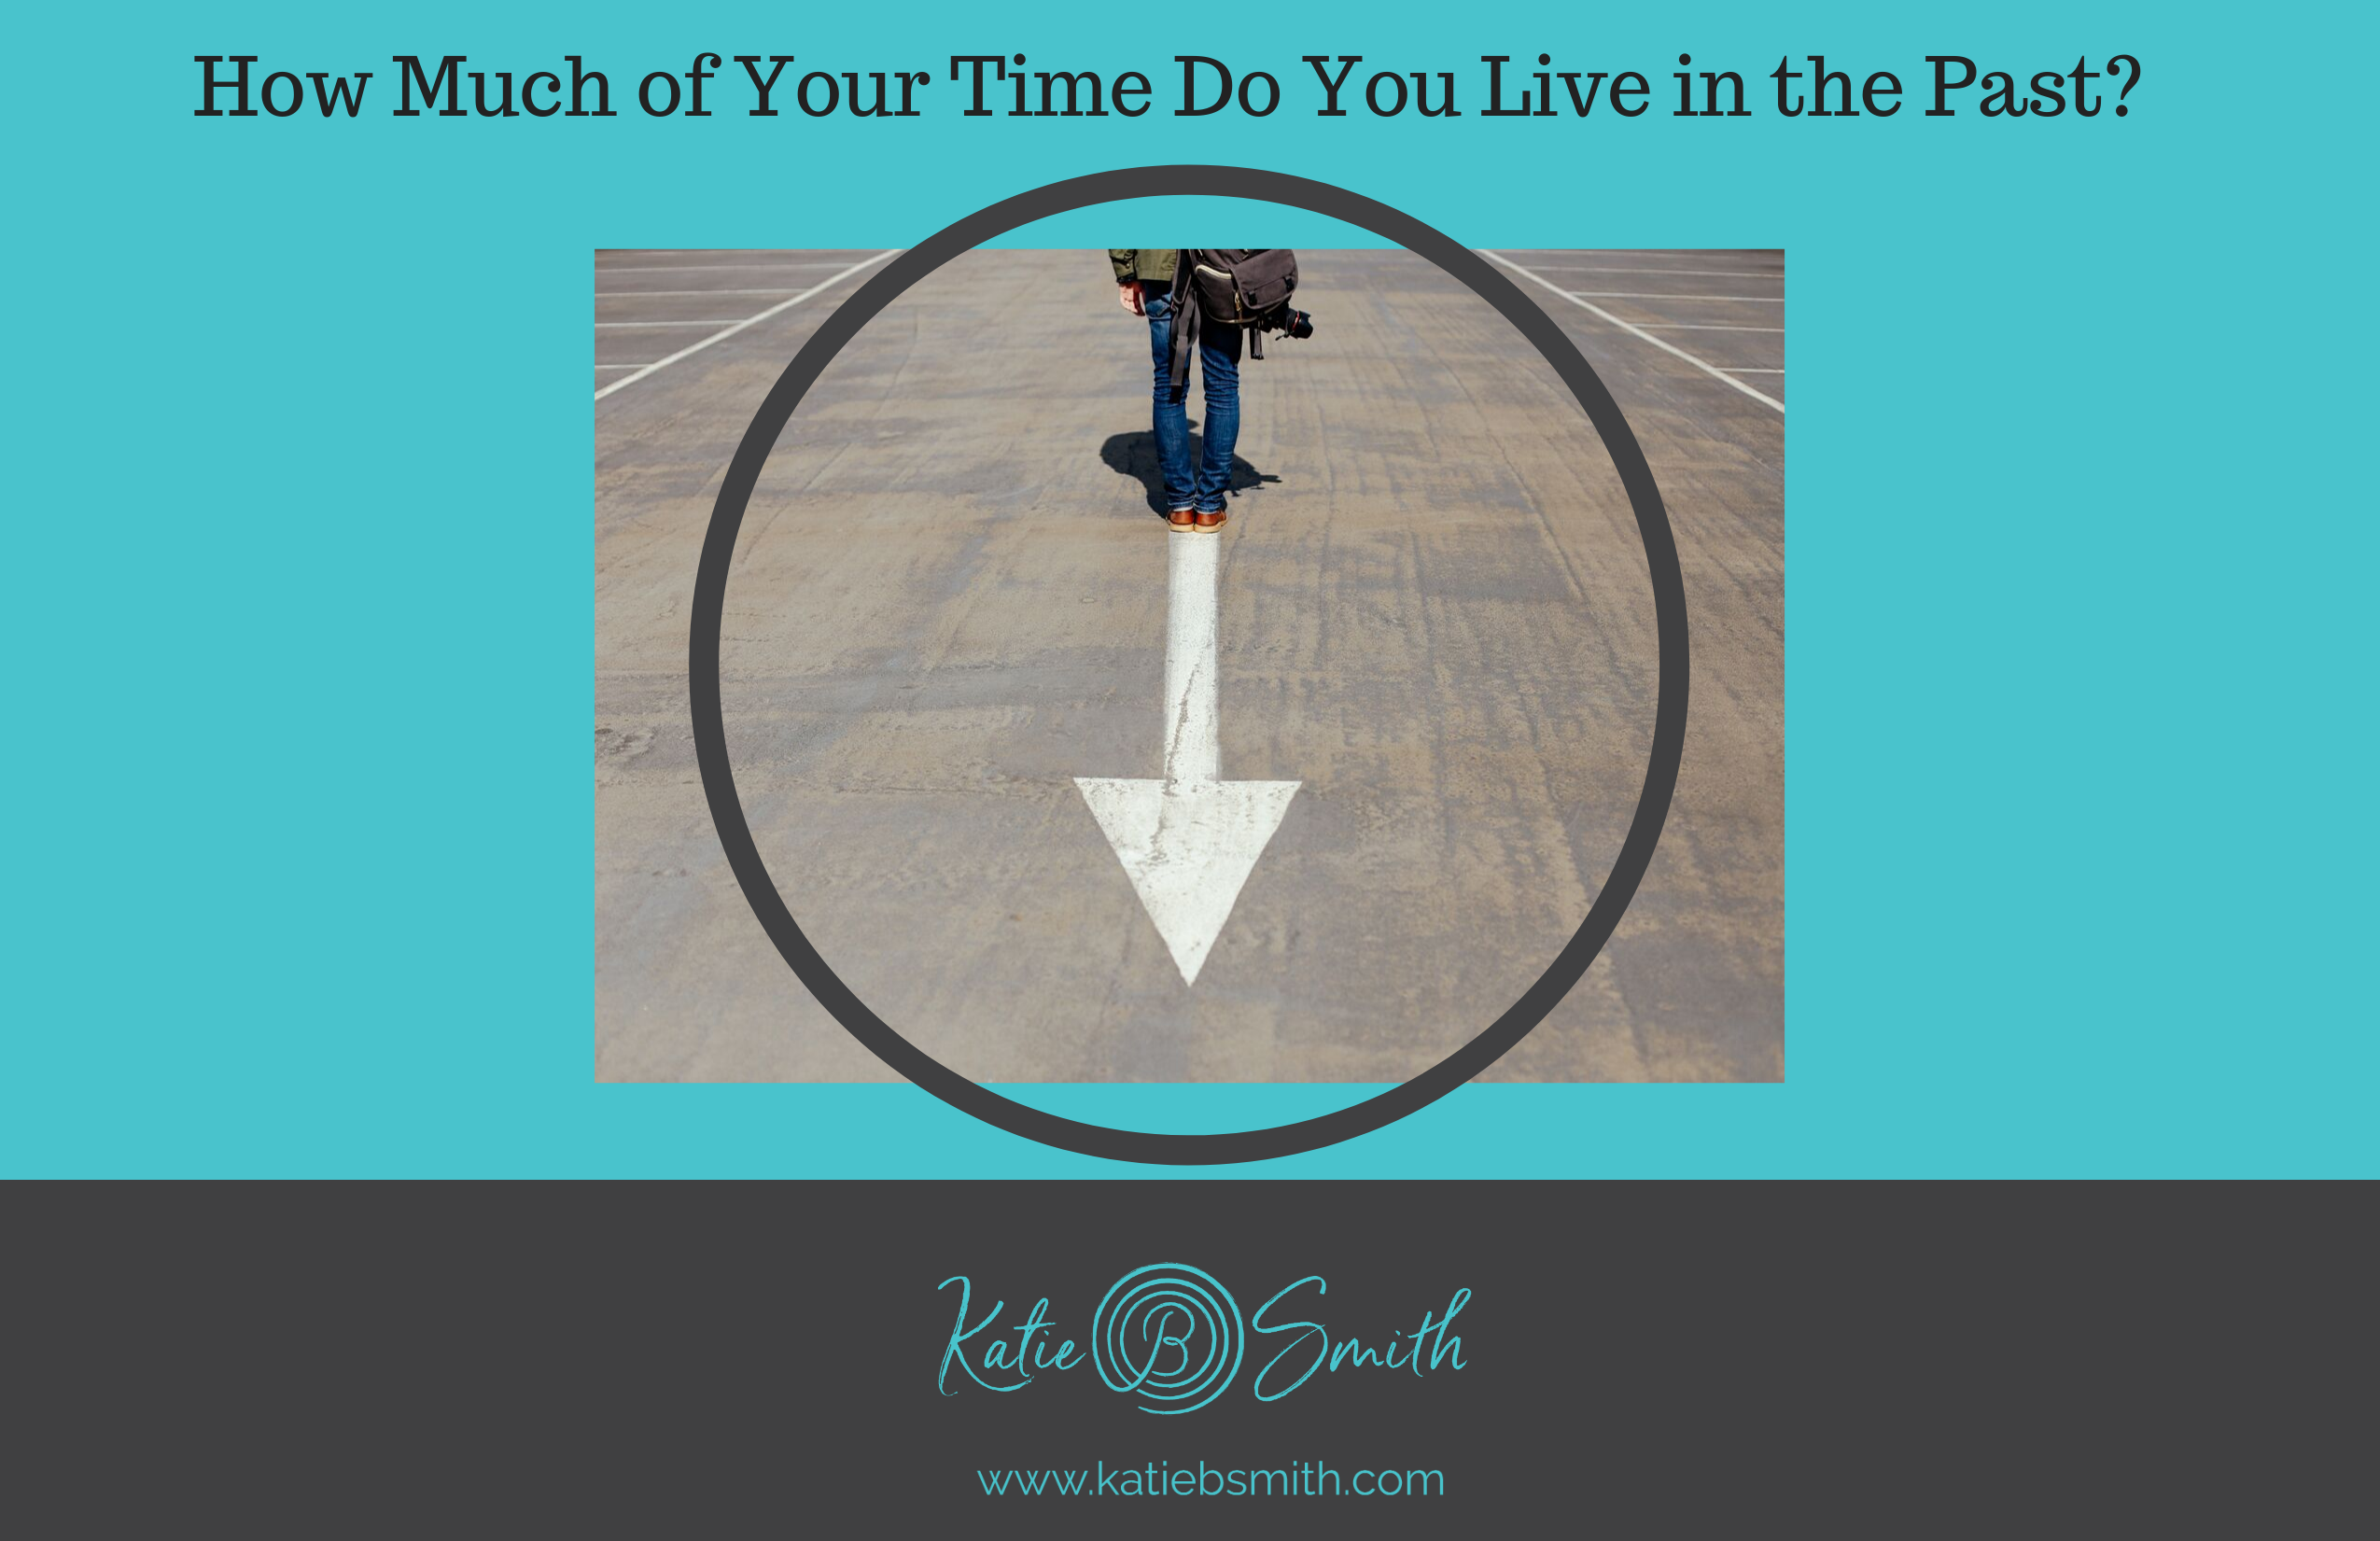 How Much of Your Time Do You Live in the Past?